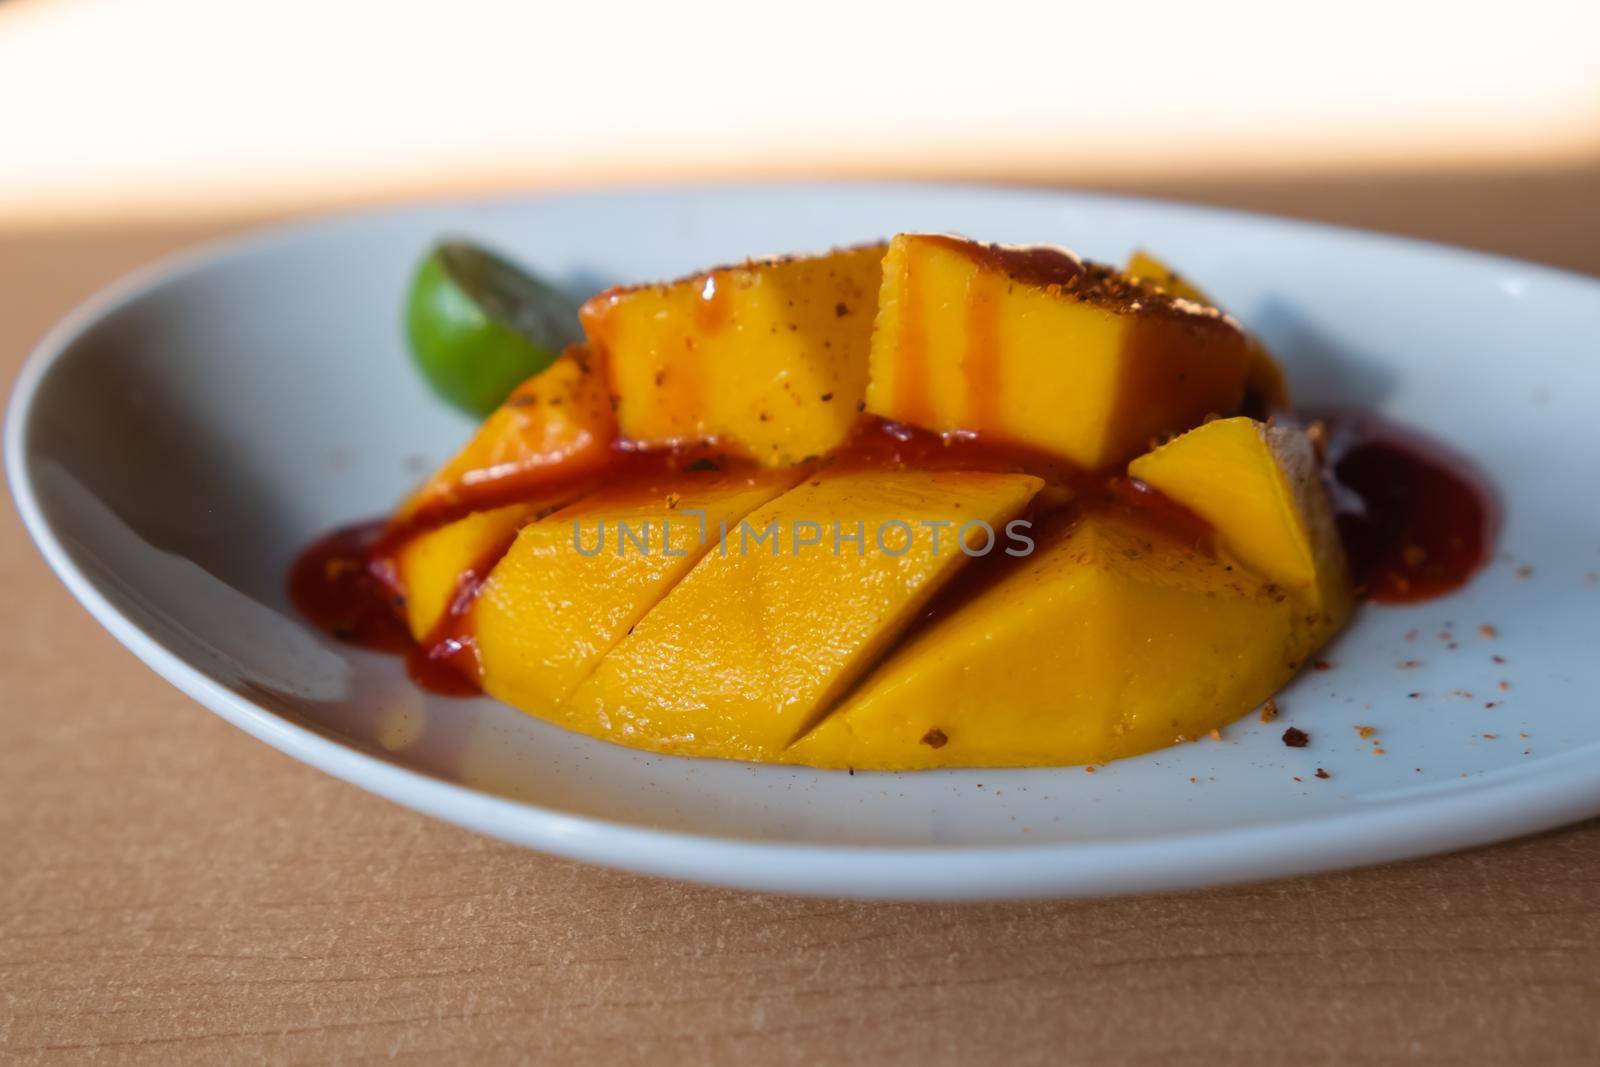 Plate of chopped mango with Mexican chamoy sauce and blurry background by Kanelbulle